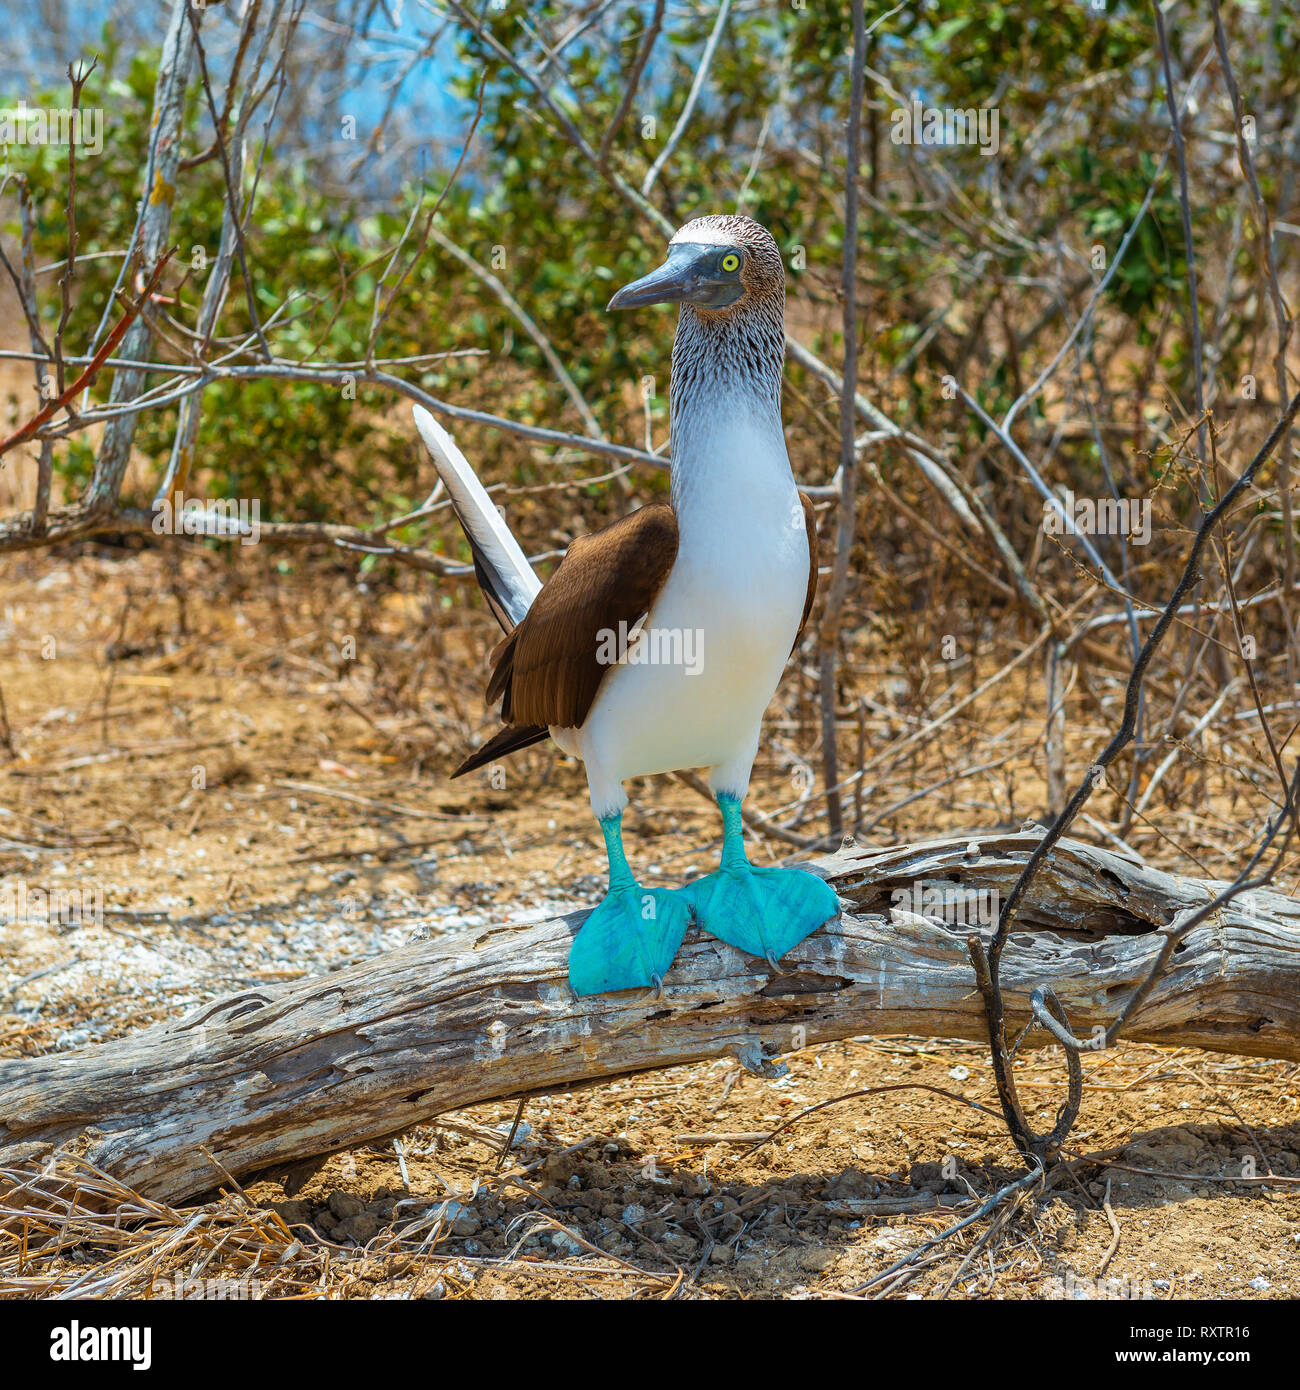 A male blue footed booby (Sula nebouxii) on a branch waiting for females in the mating period on Espanola Island, Galapagos Islands, Ecuador. Stock Photo